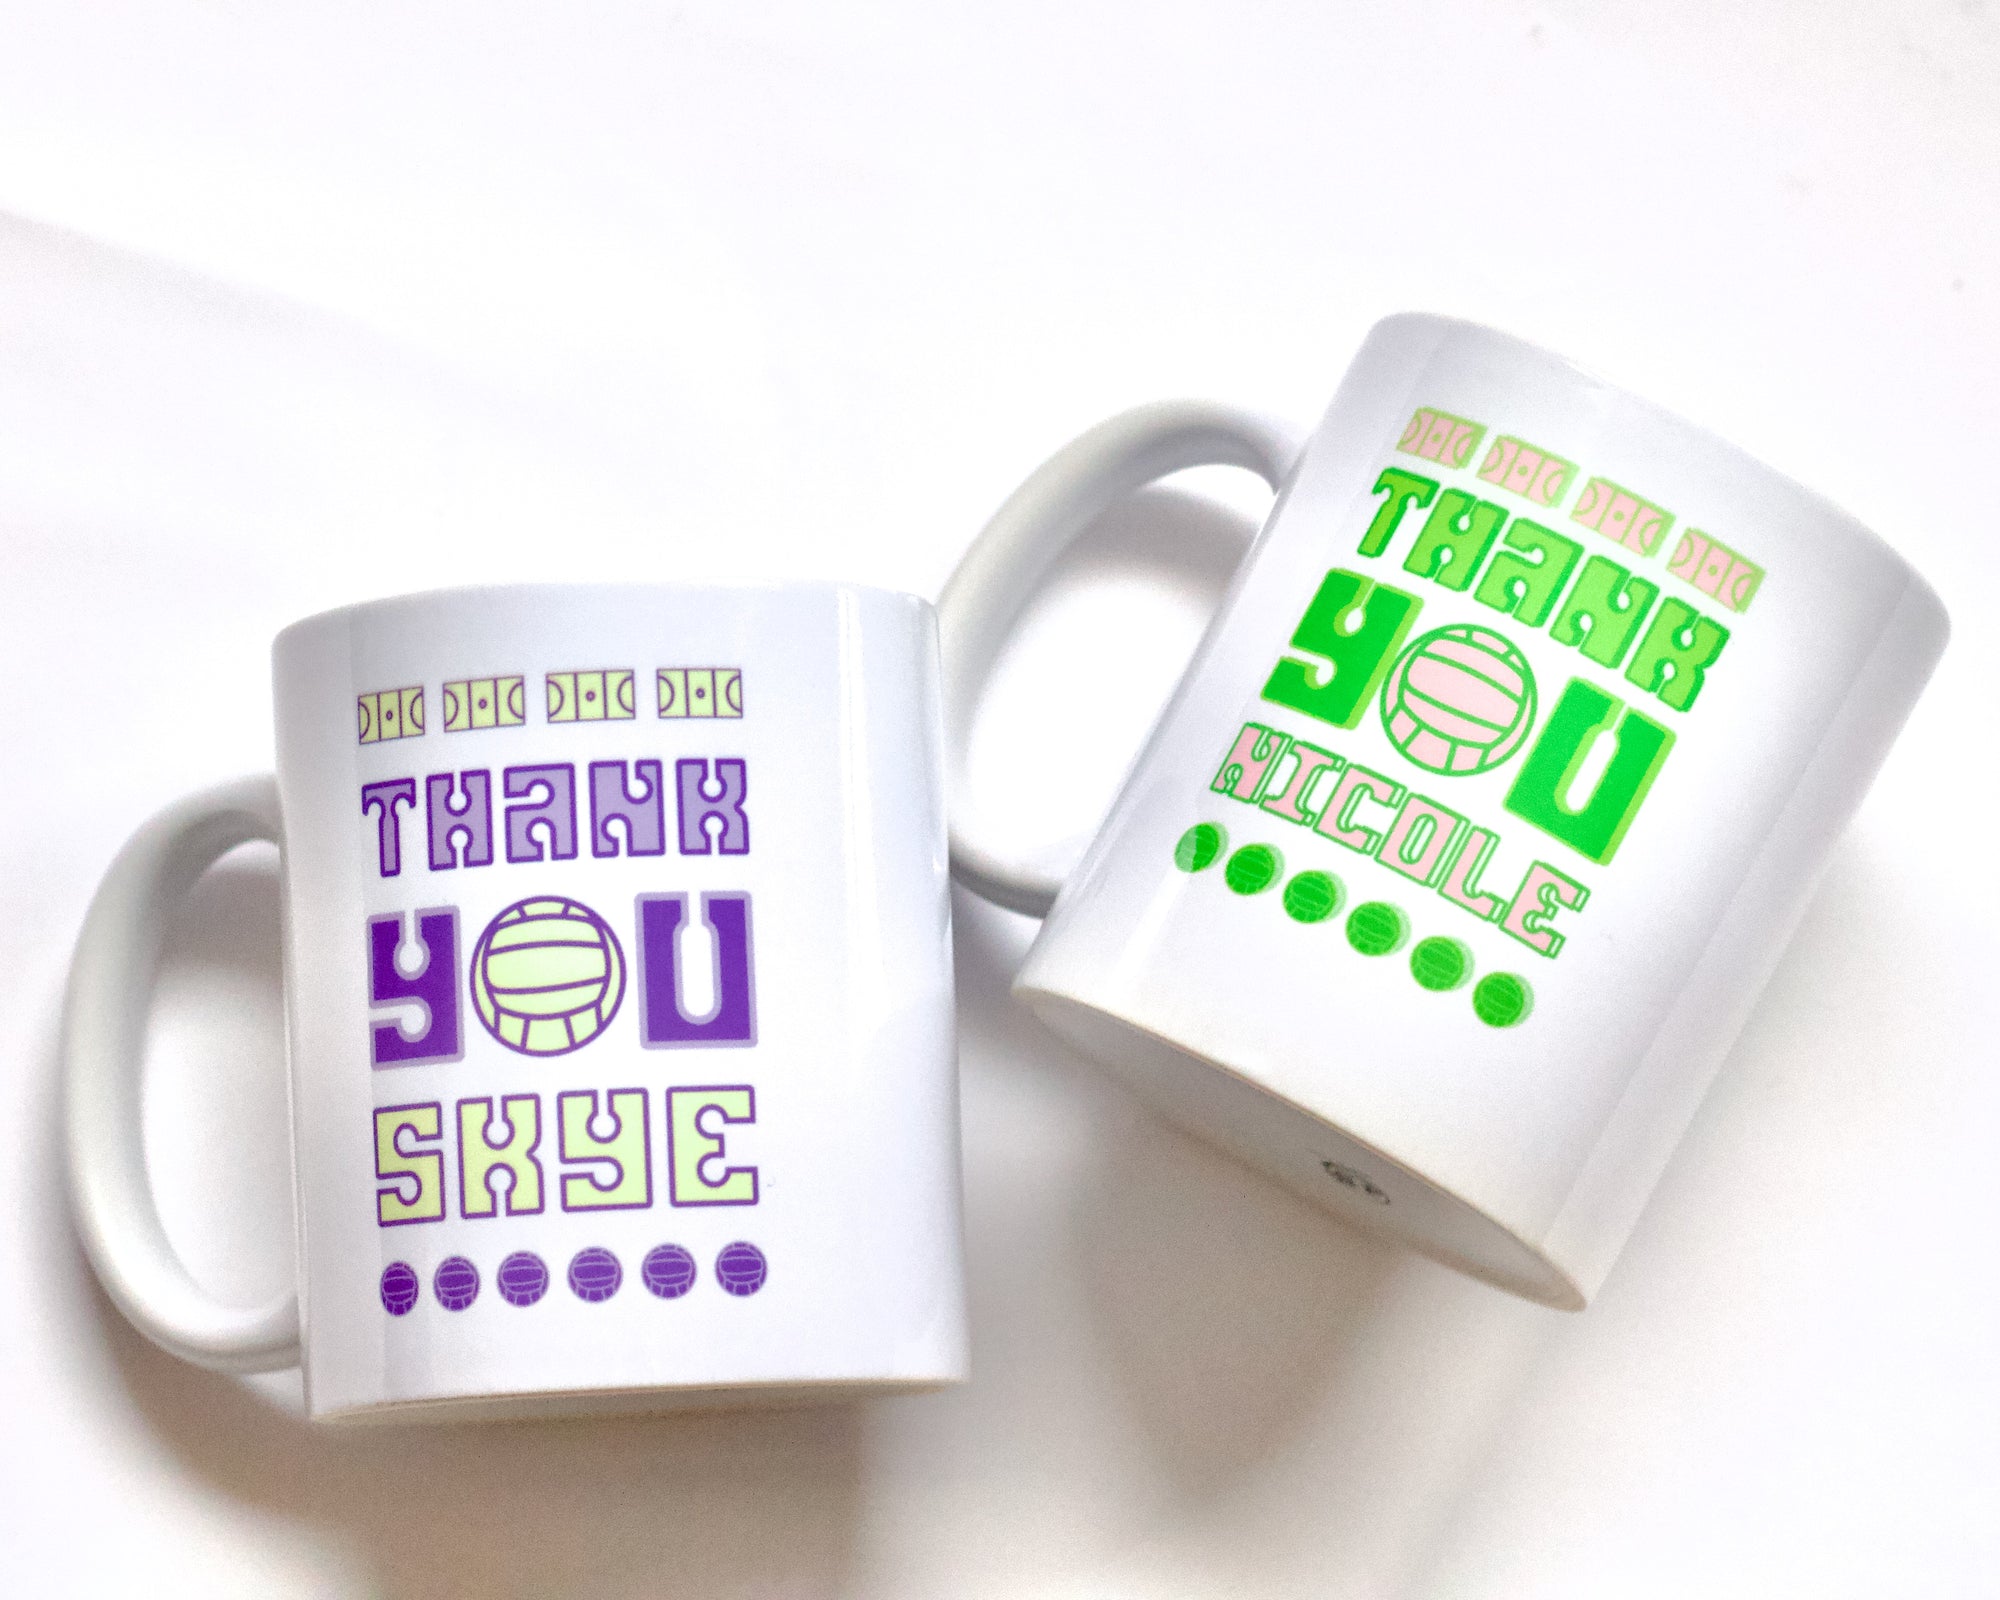 Two netball coach thank you mugs in lime and purple colour schemes featuring fun typography evoking netball courts